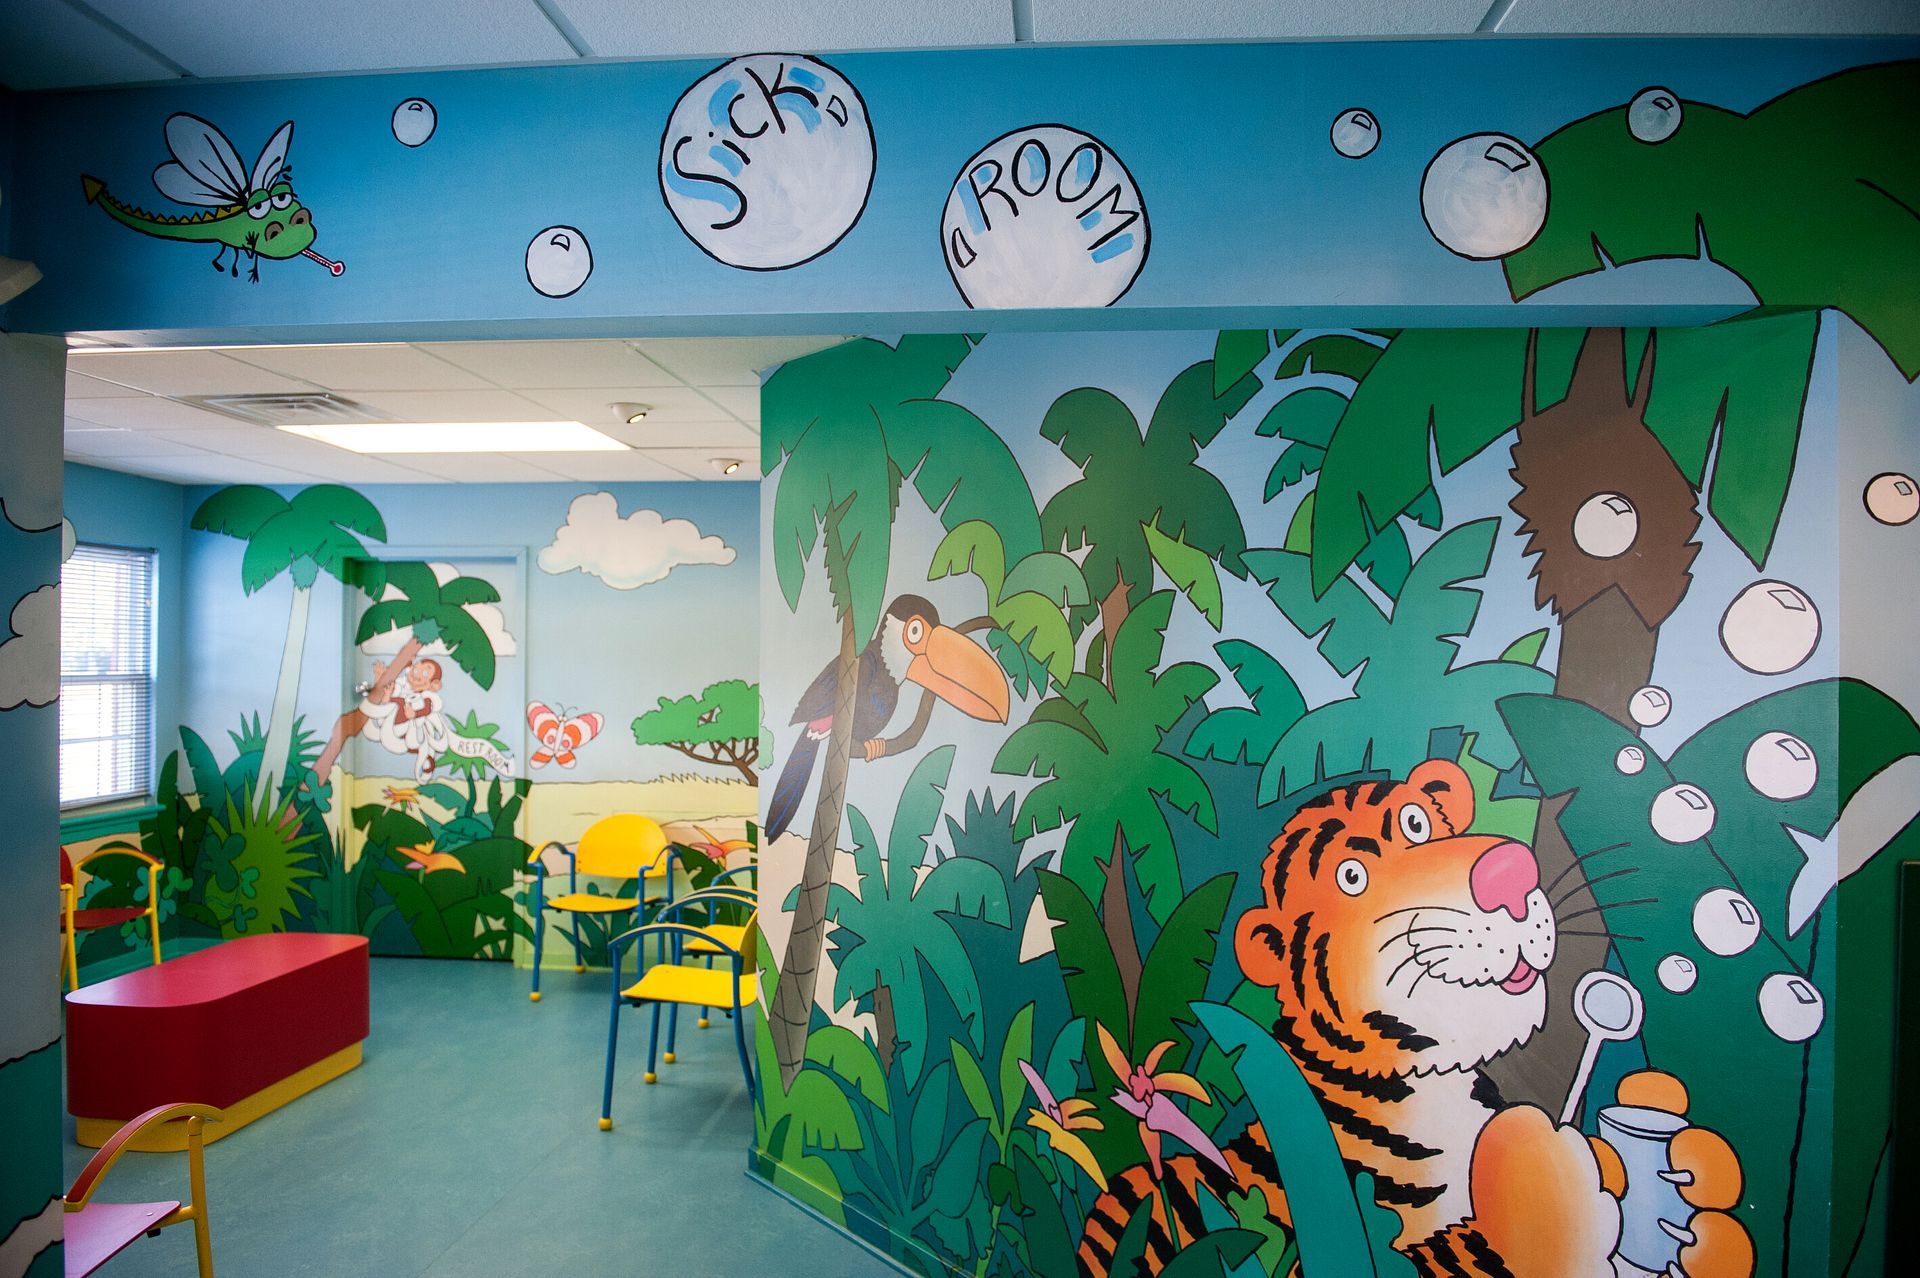 Sick waiting area with colorful mural on the walls at a pediatricians office